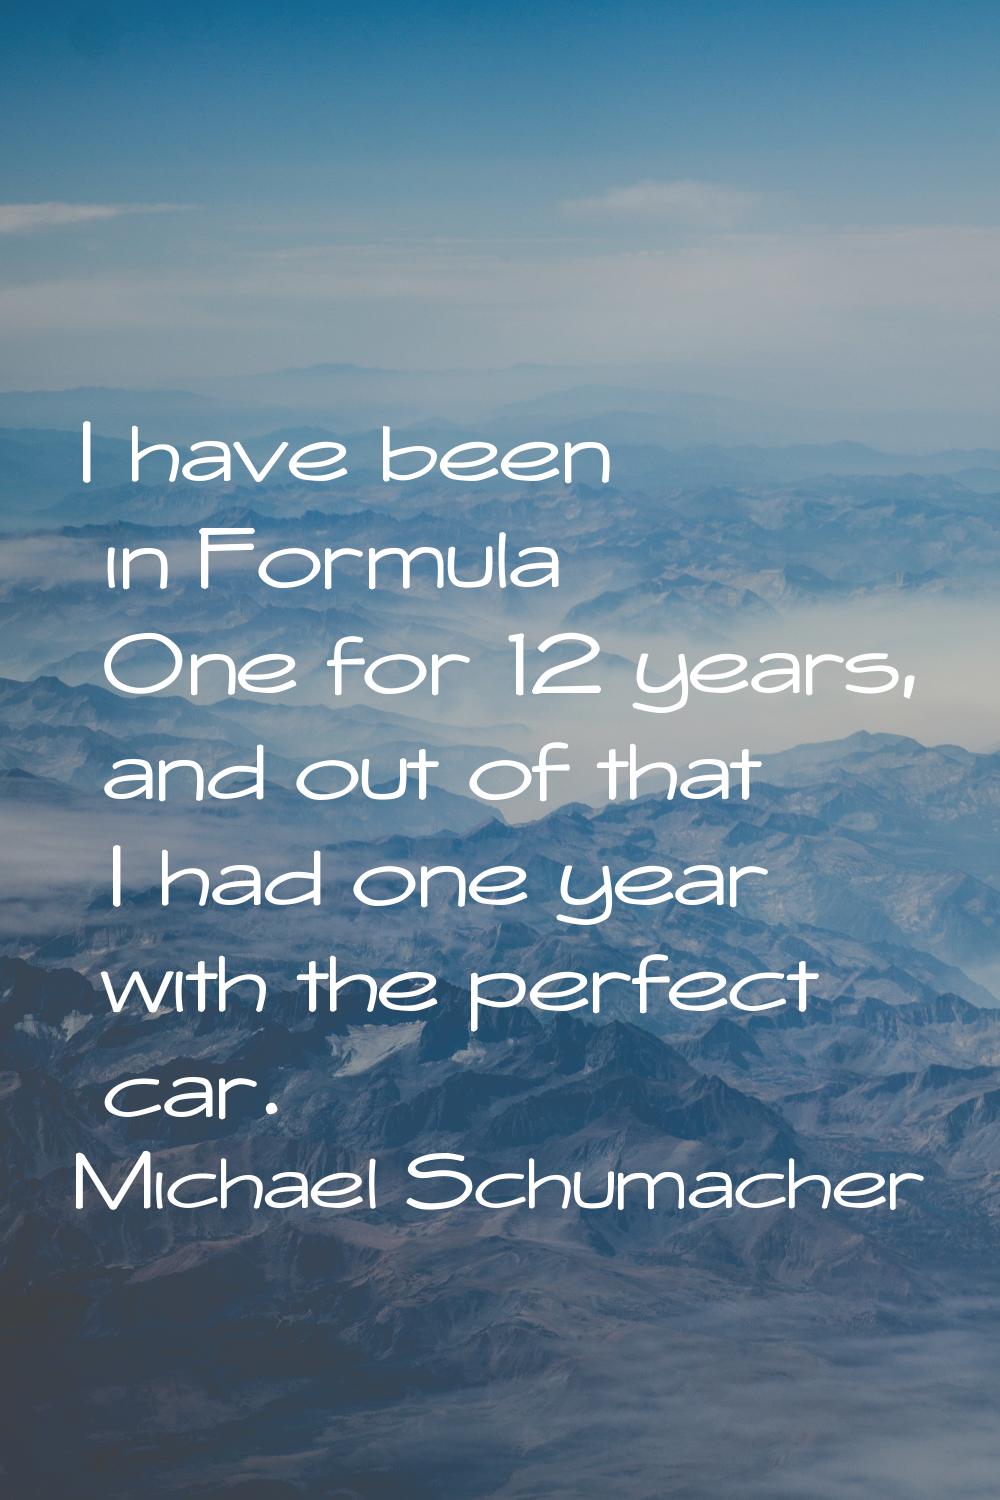 I have been in Formula One for 12 years, and out of that I had one year with the perfect car.